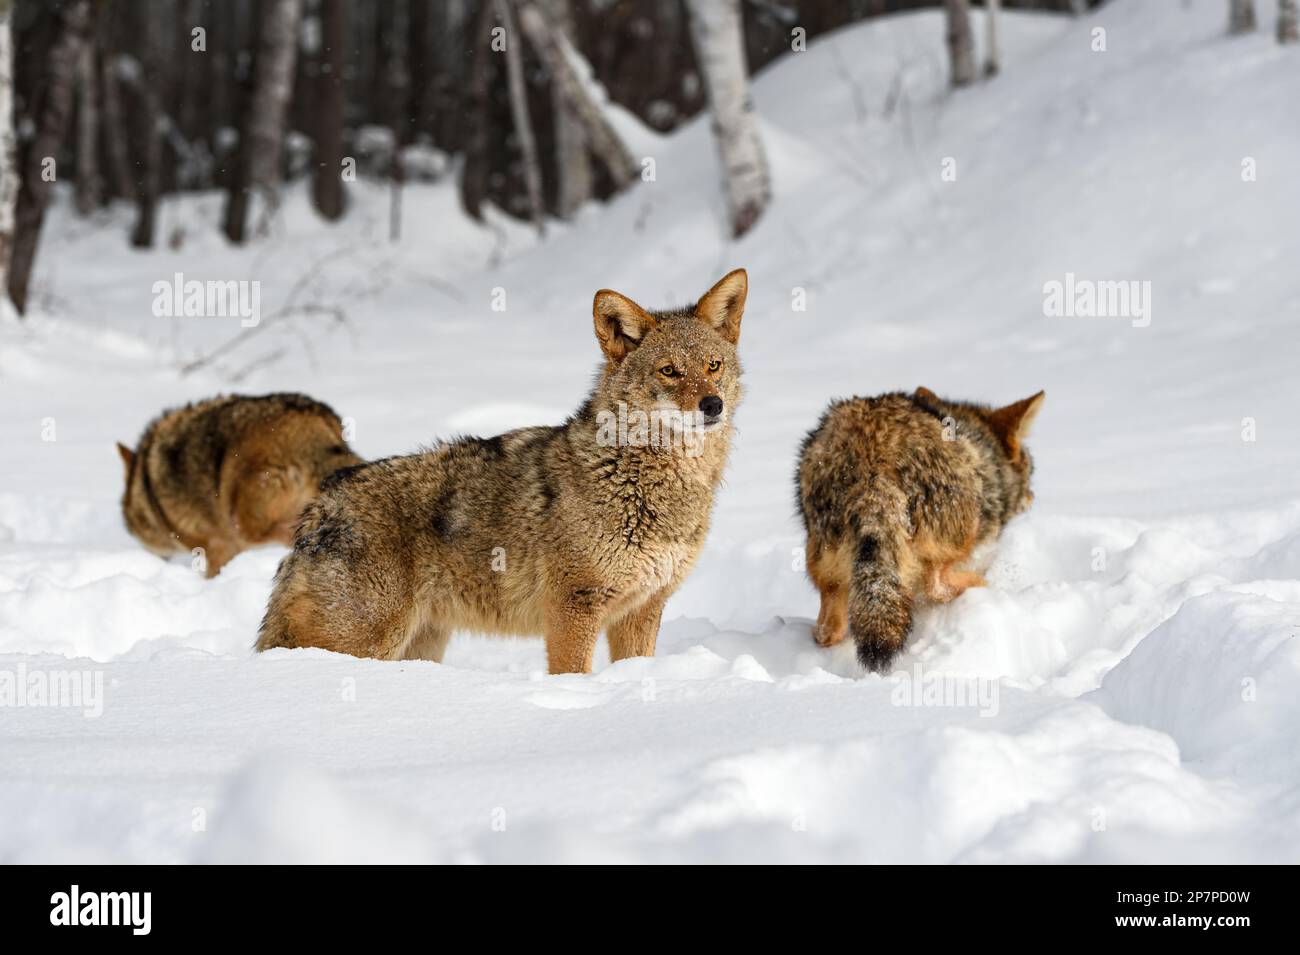 Coyote (Canis latrans) Looks Up While Two Others Walk Away Winter - captive animals Stock Photo